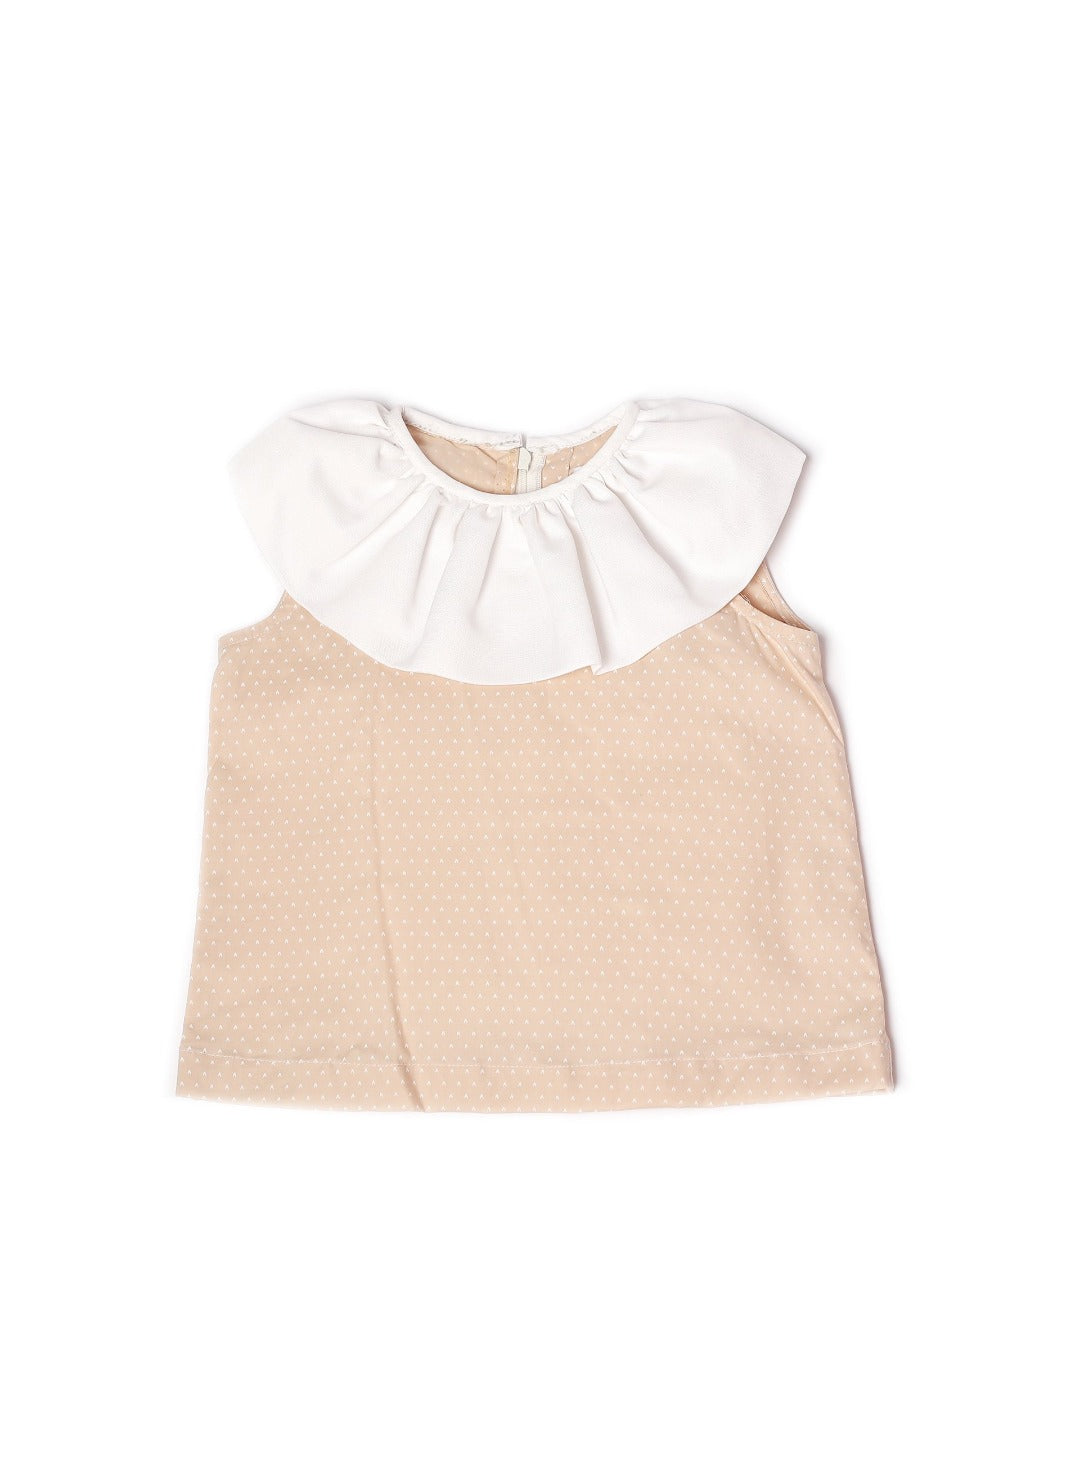 chocolate milk top with white frilled collar